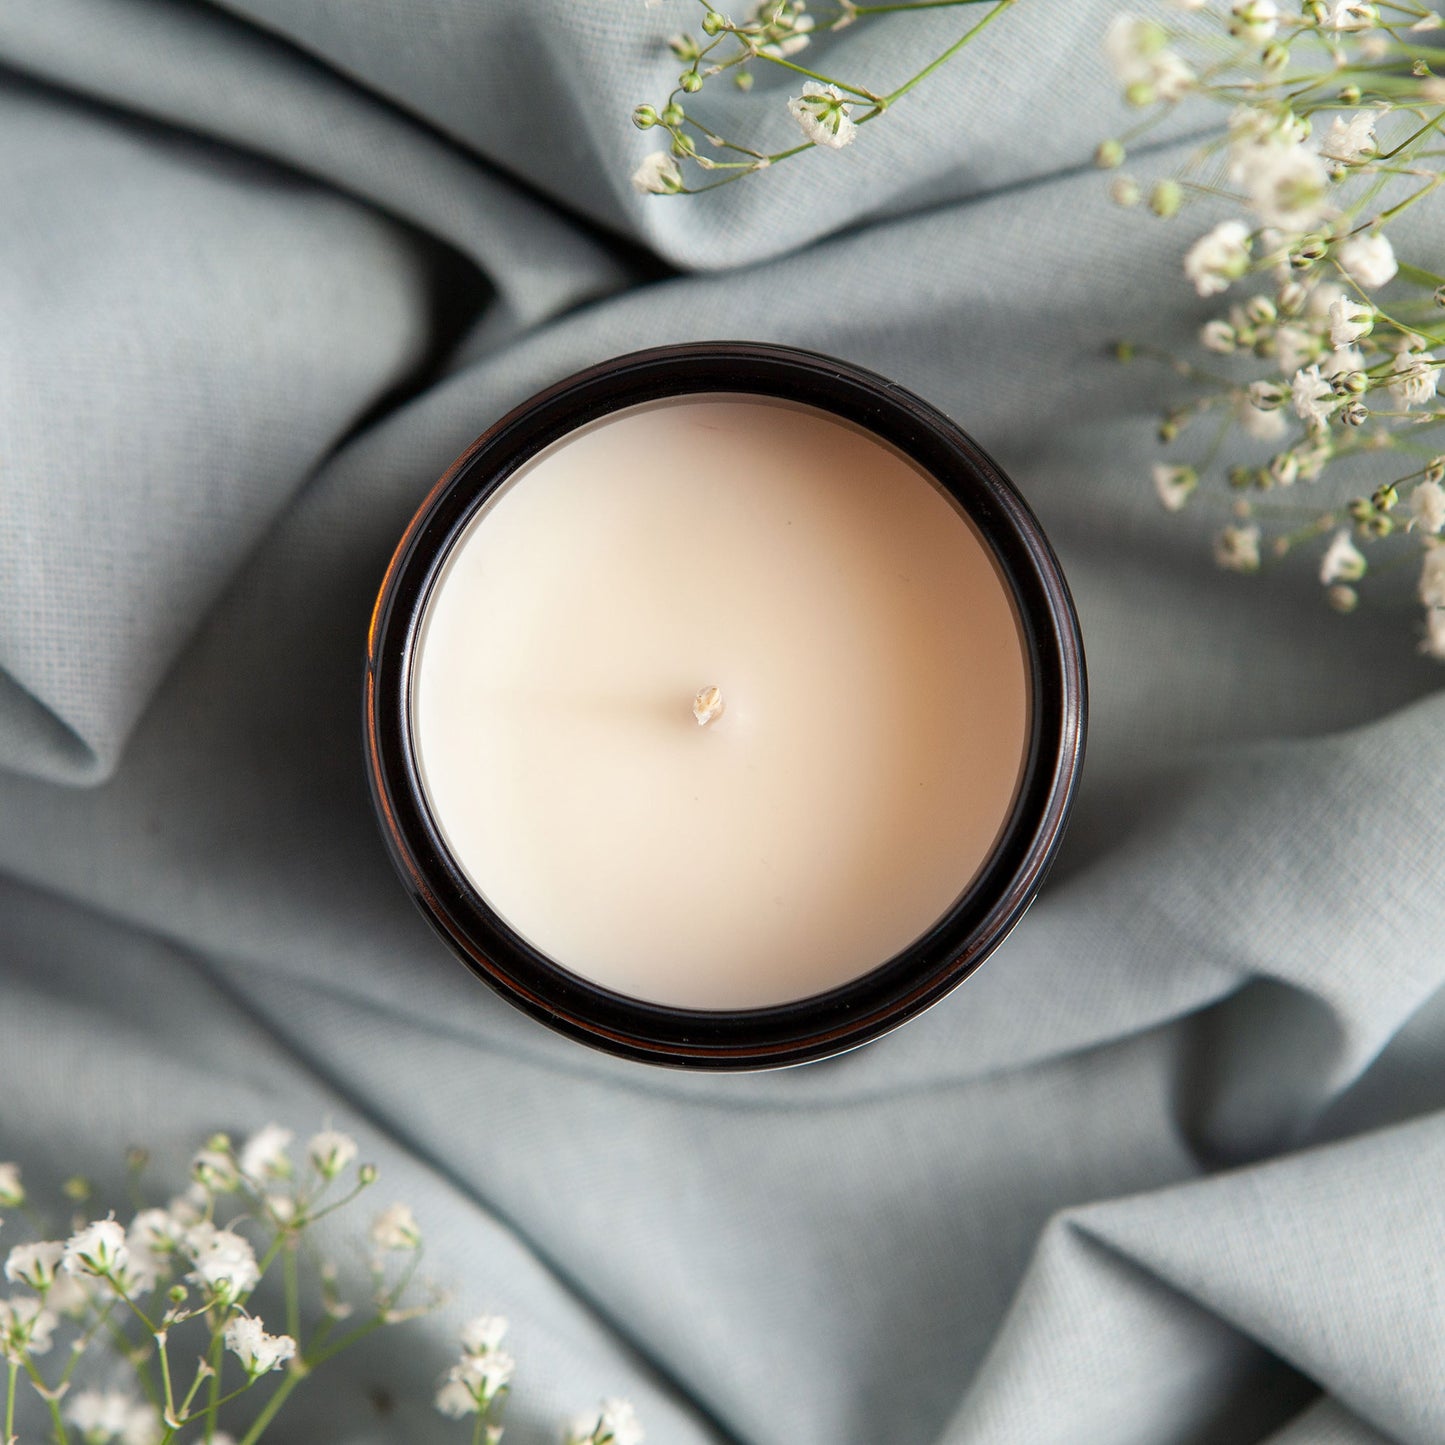 Mother's Day Gift Mumma Needs Coffee Candle - Kindred Fires